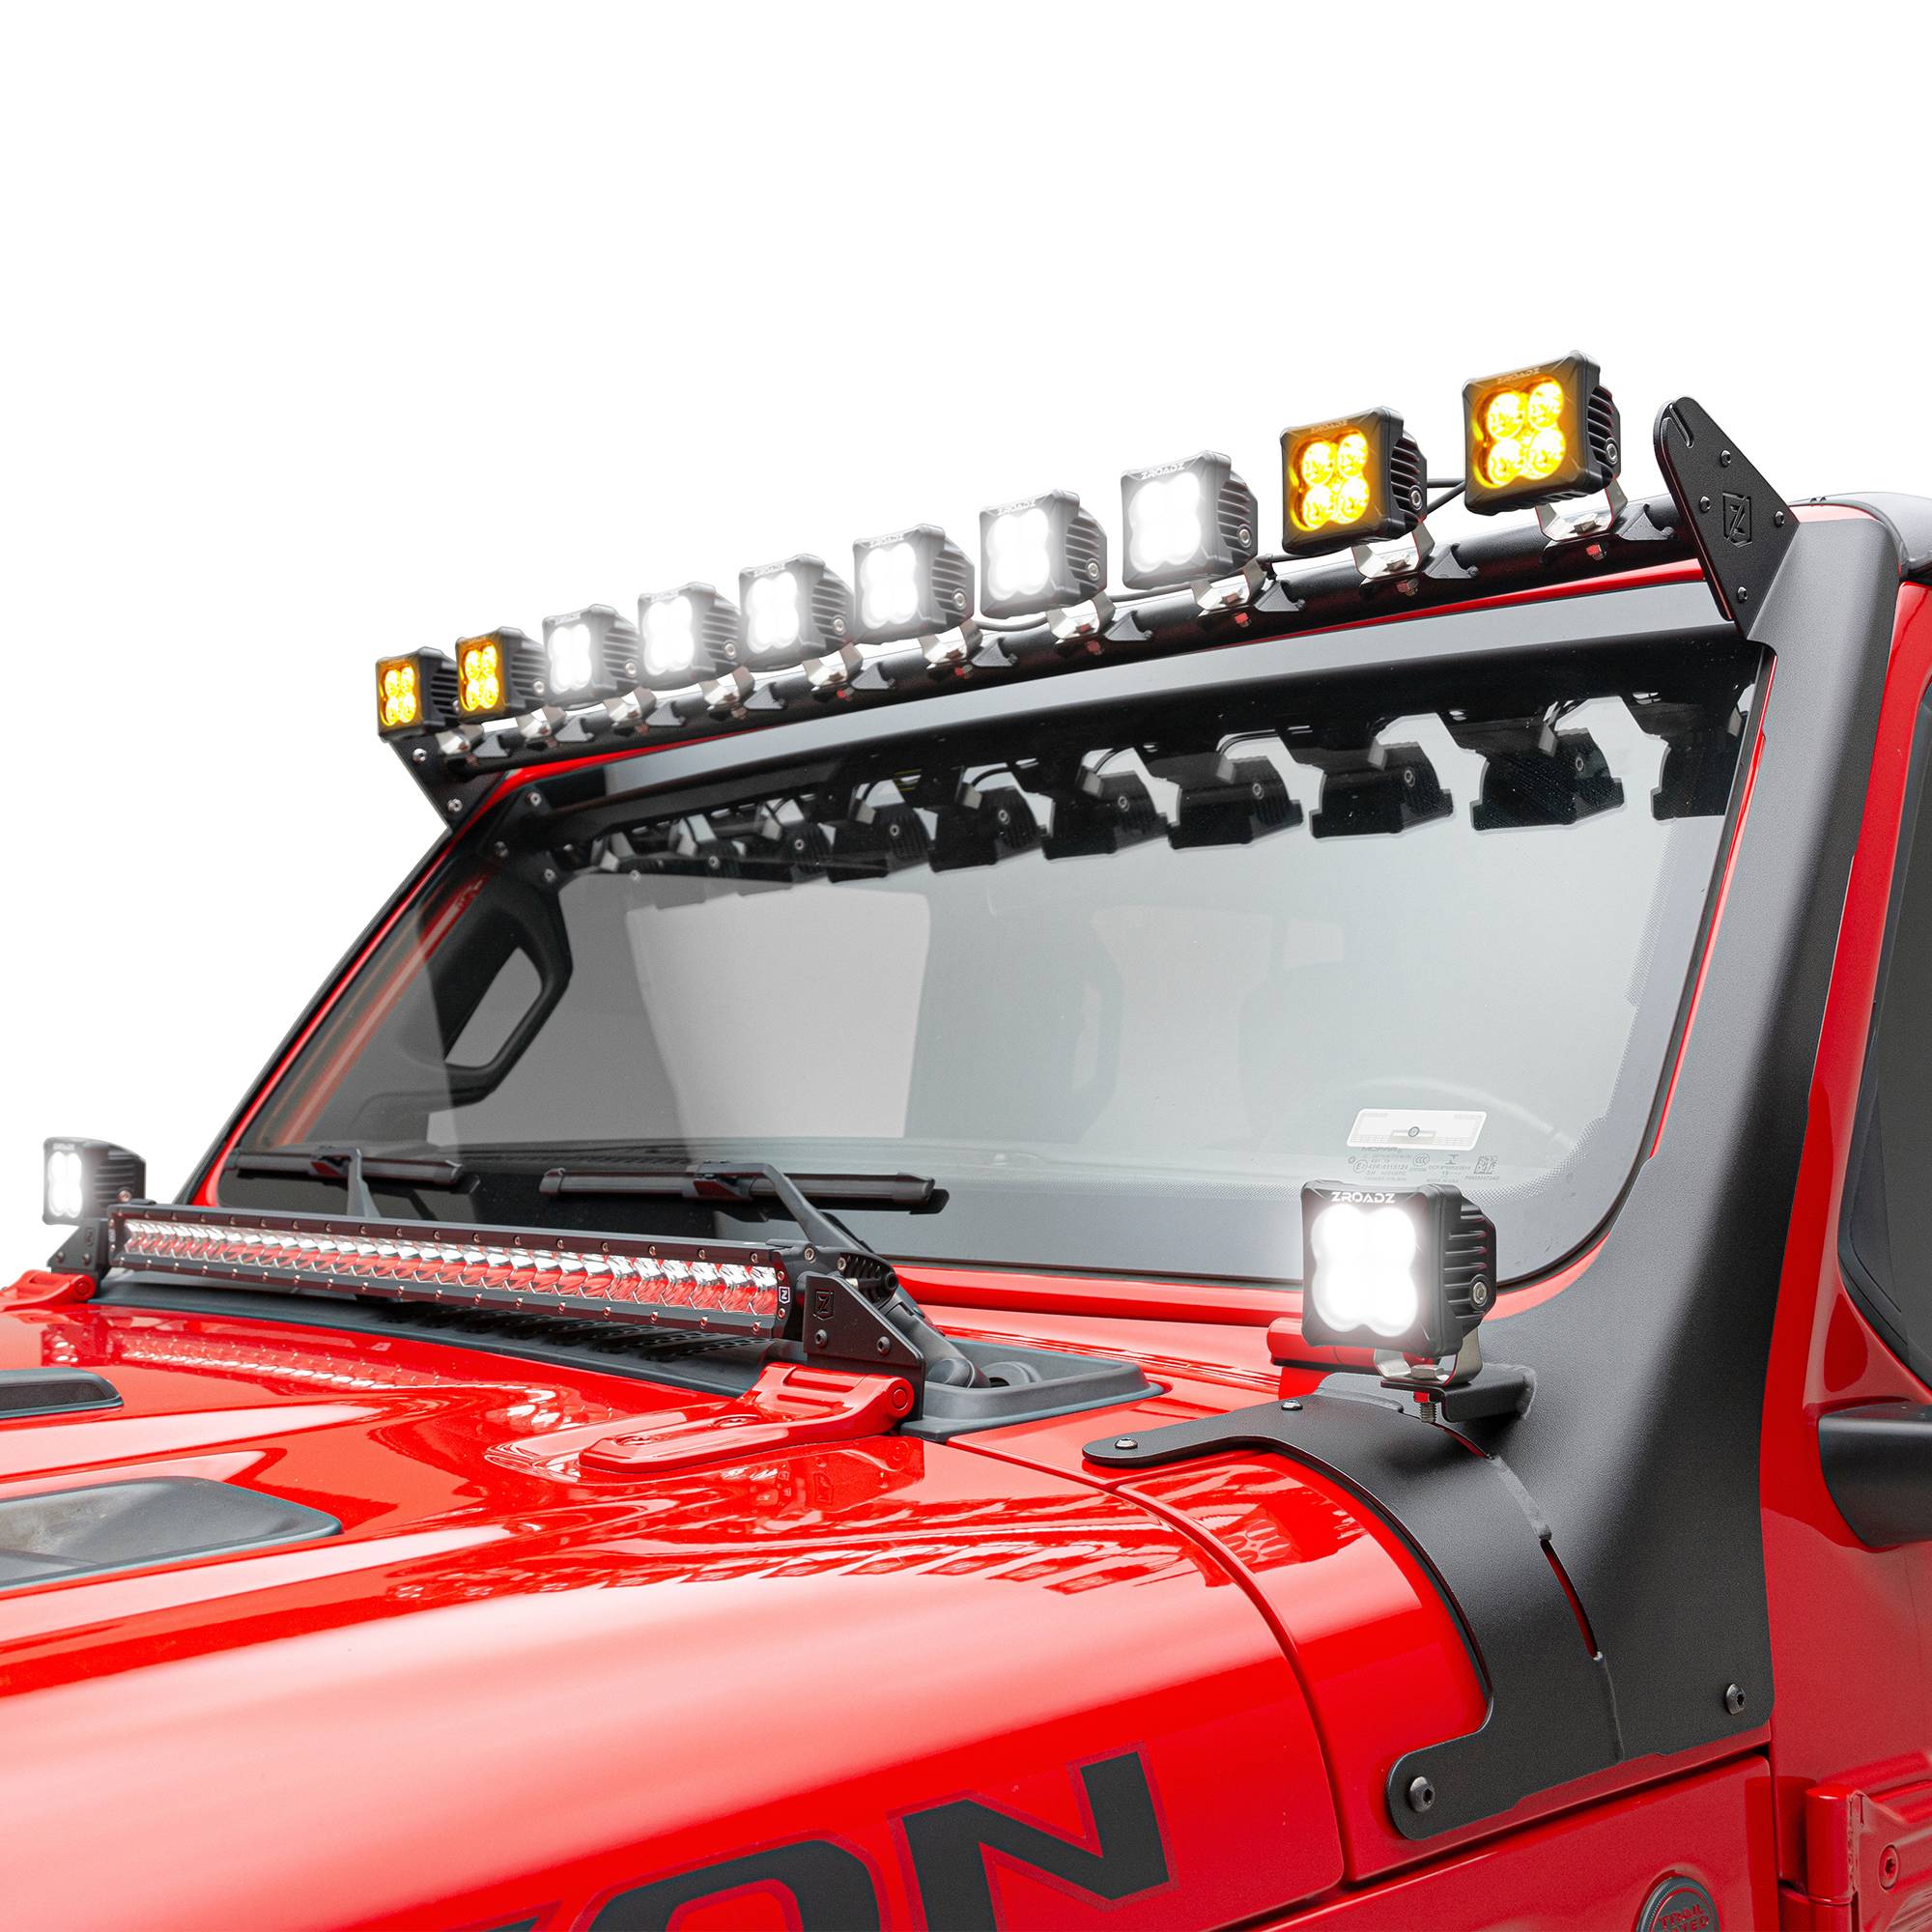 ZROADZ OFF ROAD PRODUCTS - 2018-2023 Jeep JL/2019-2023 Jeep Gladiator, Multi-LED Roof Cross Bar and 2-Pod A-Pillar Complete KIT, Includes (12) 3-Inch ZROADZ Light Pods - Part # Z934931-KIT2AW